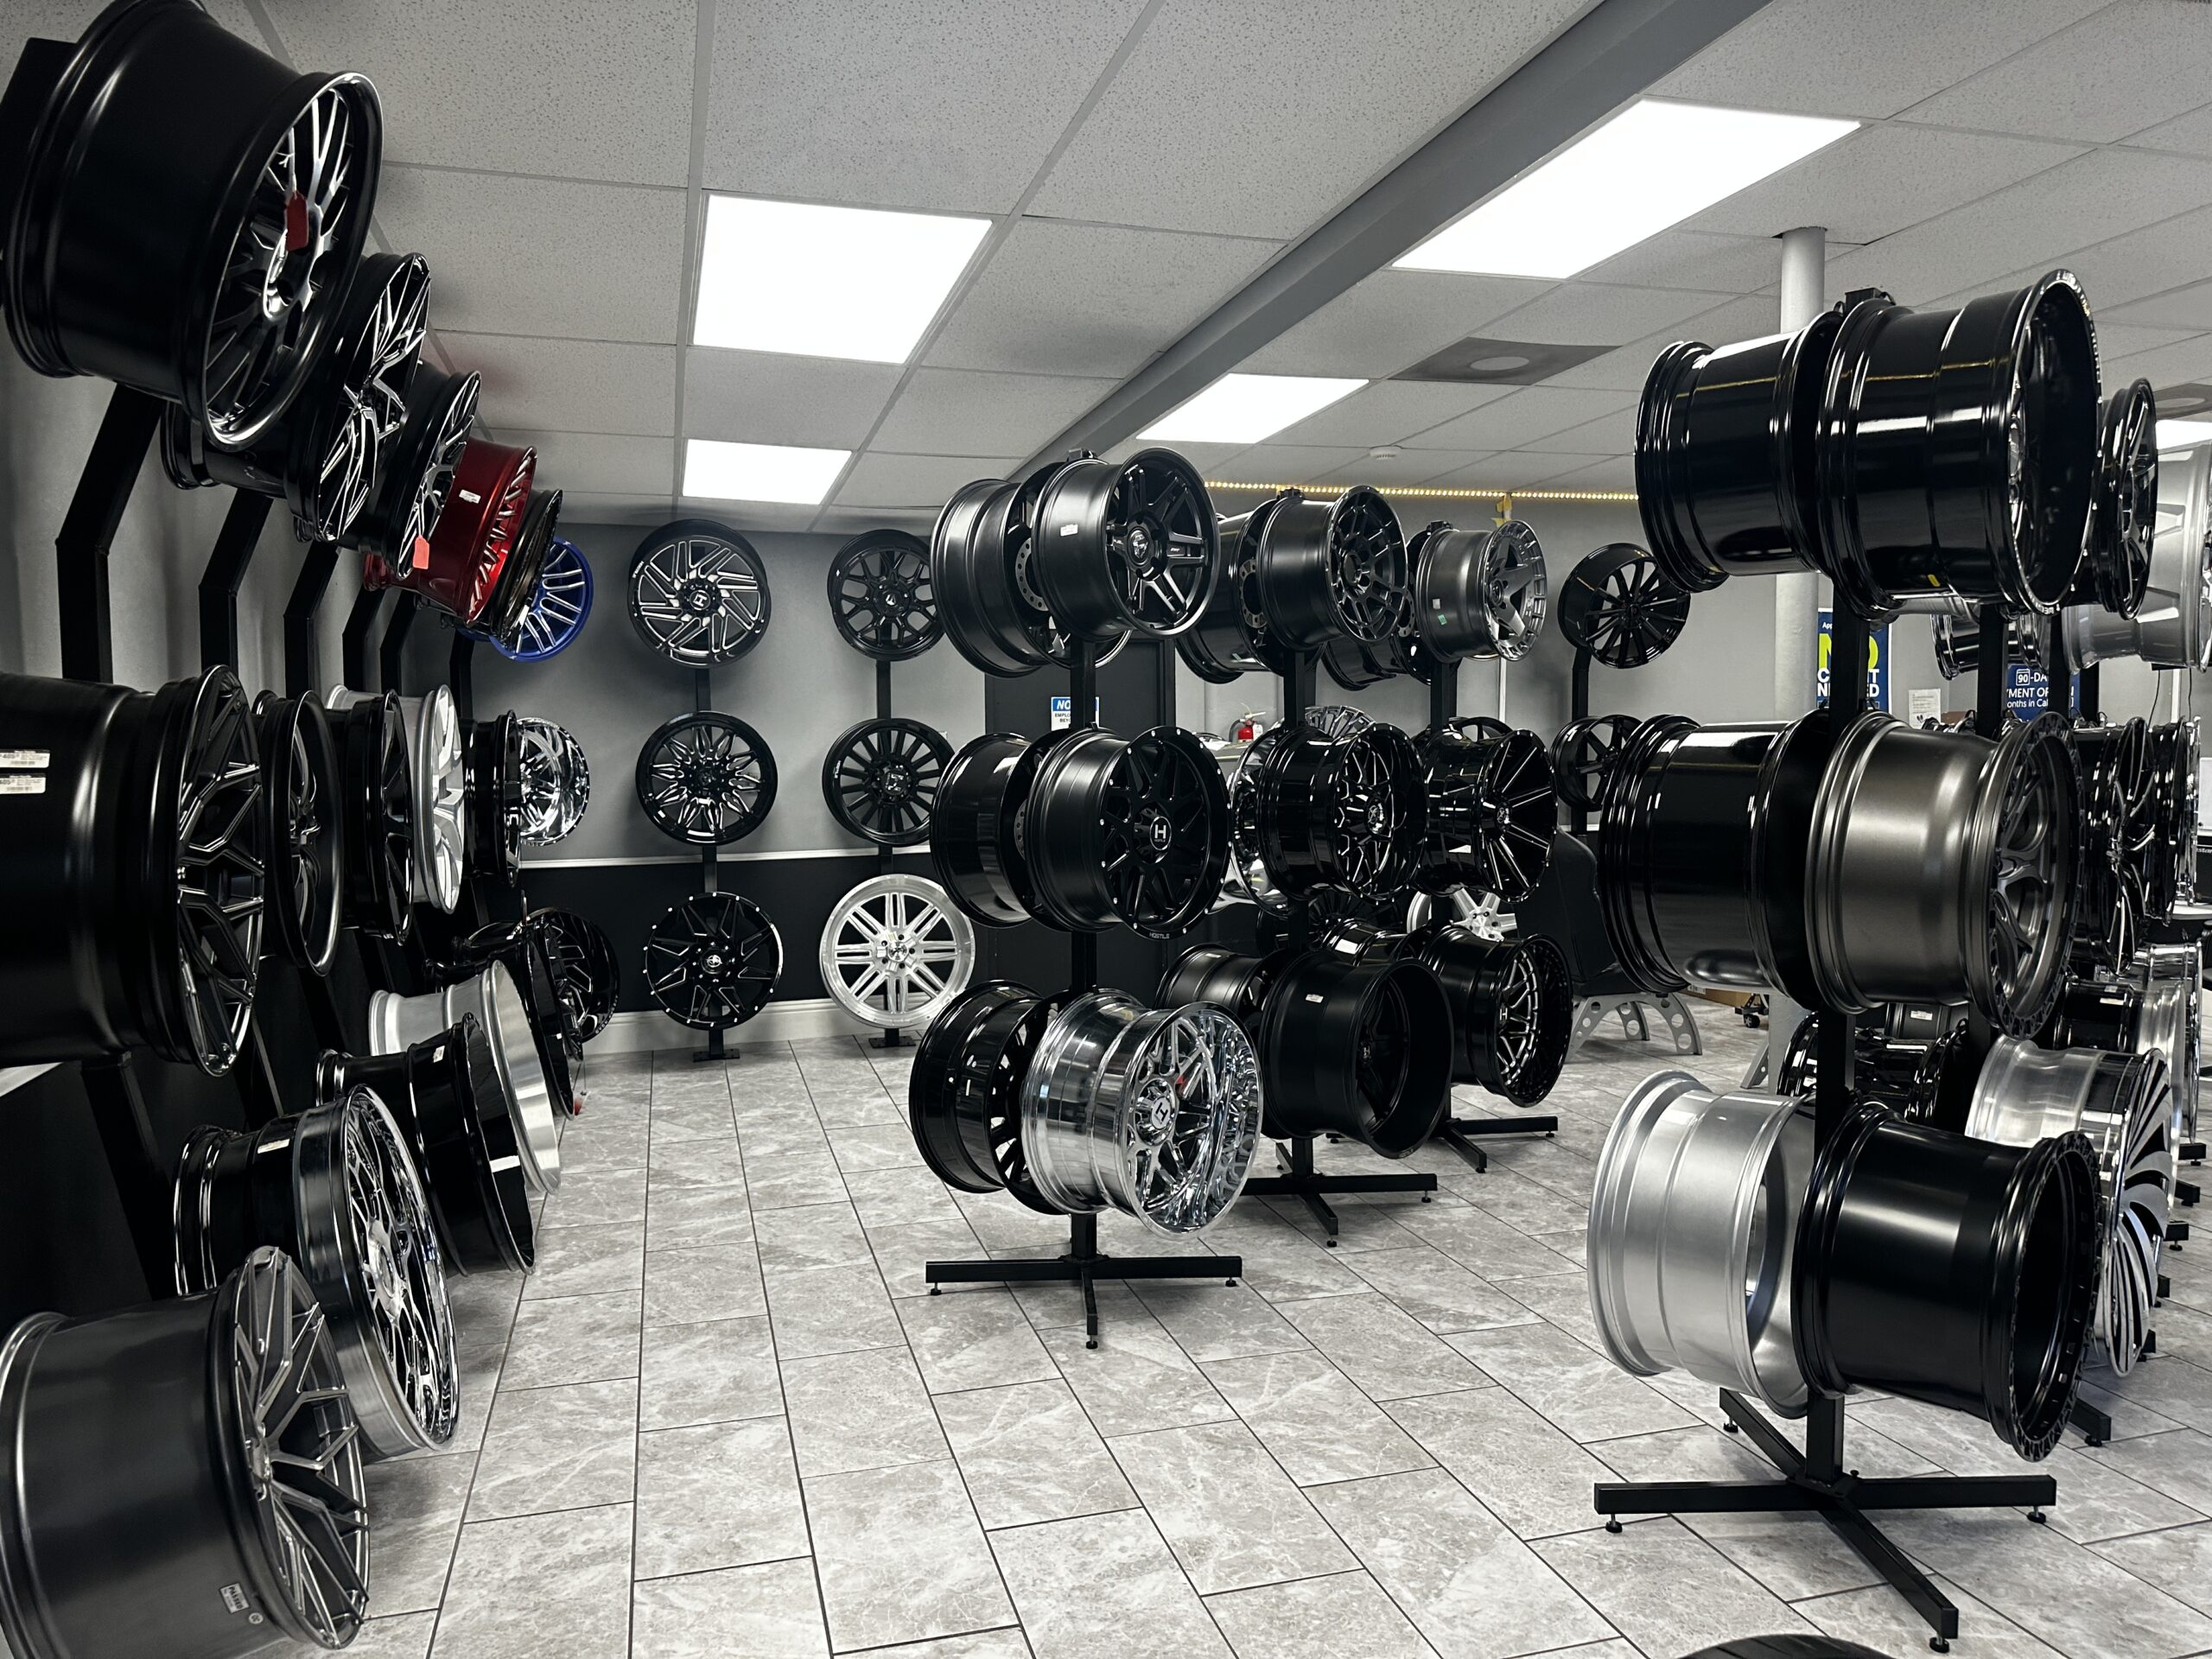 The Wheel Identity showroom, showcasing dozens of wheels and rims that are all available for financing through our partners.